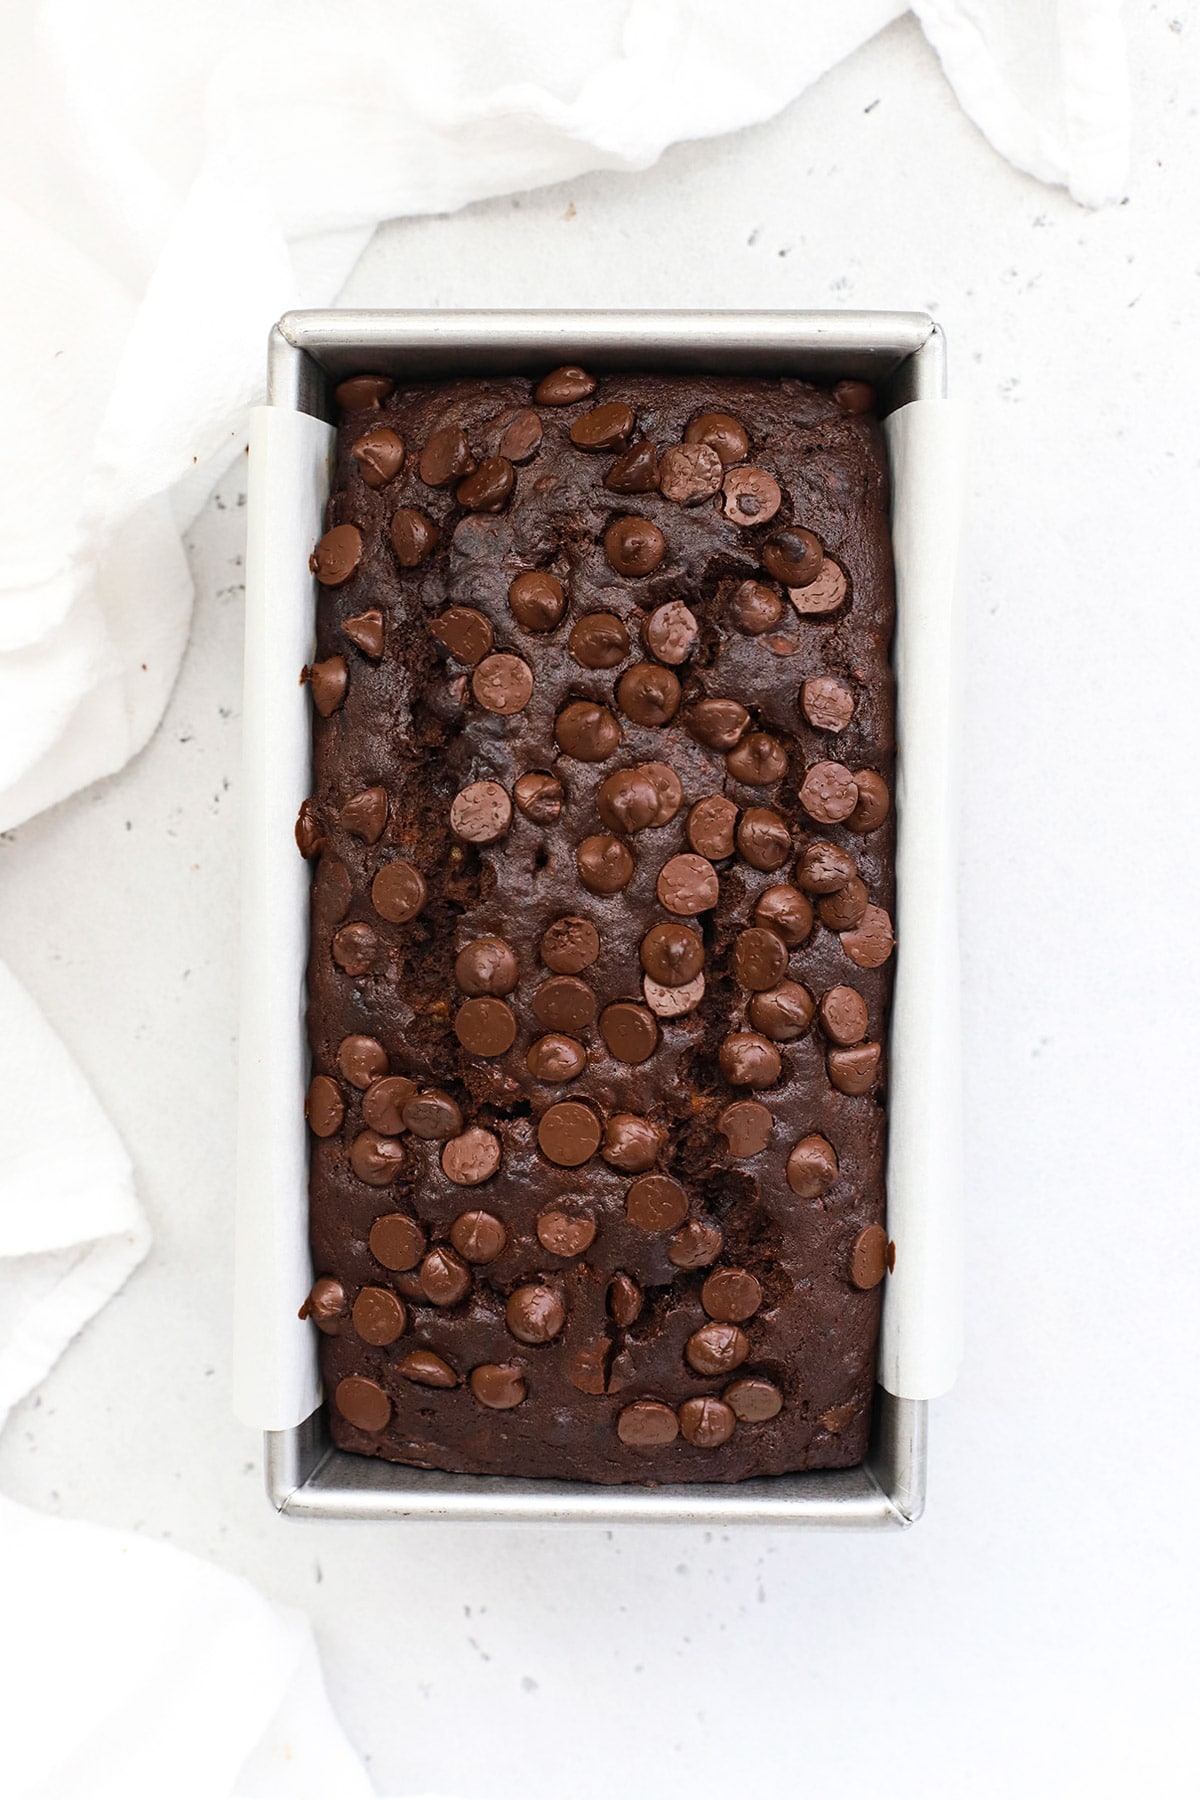 Overhead view of a loaf of gluten-free double chocolate banana bread